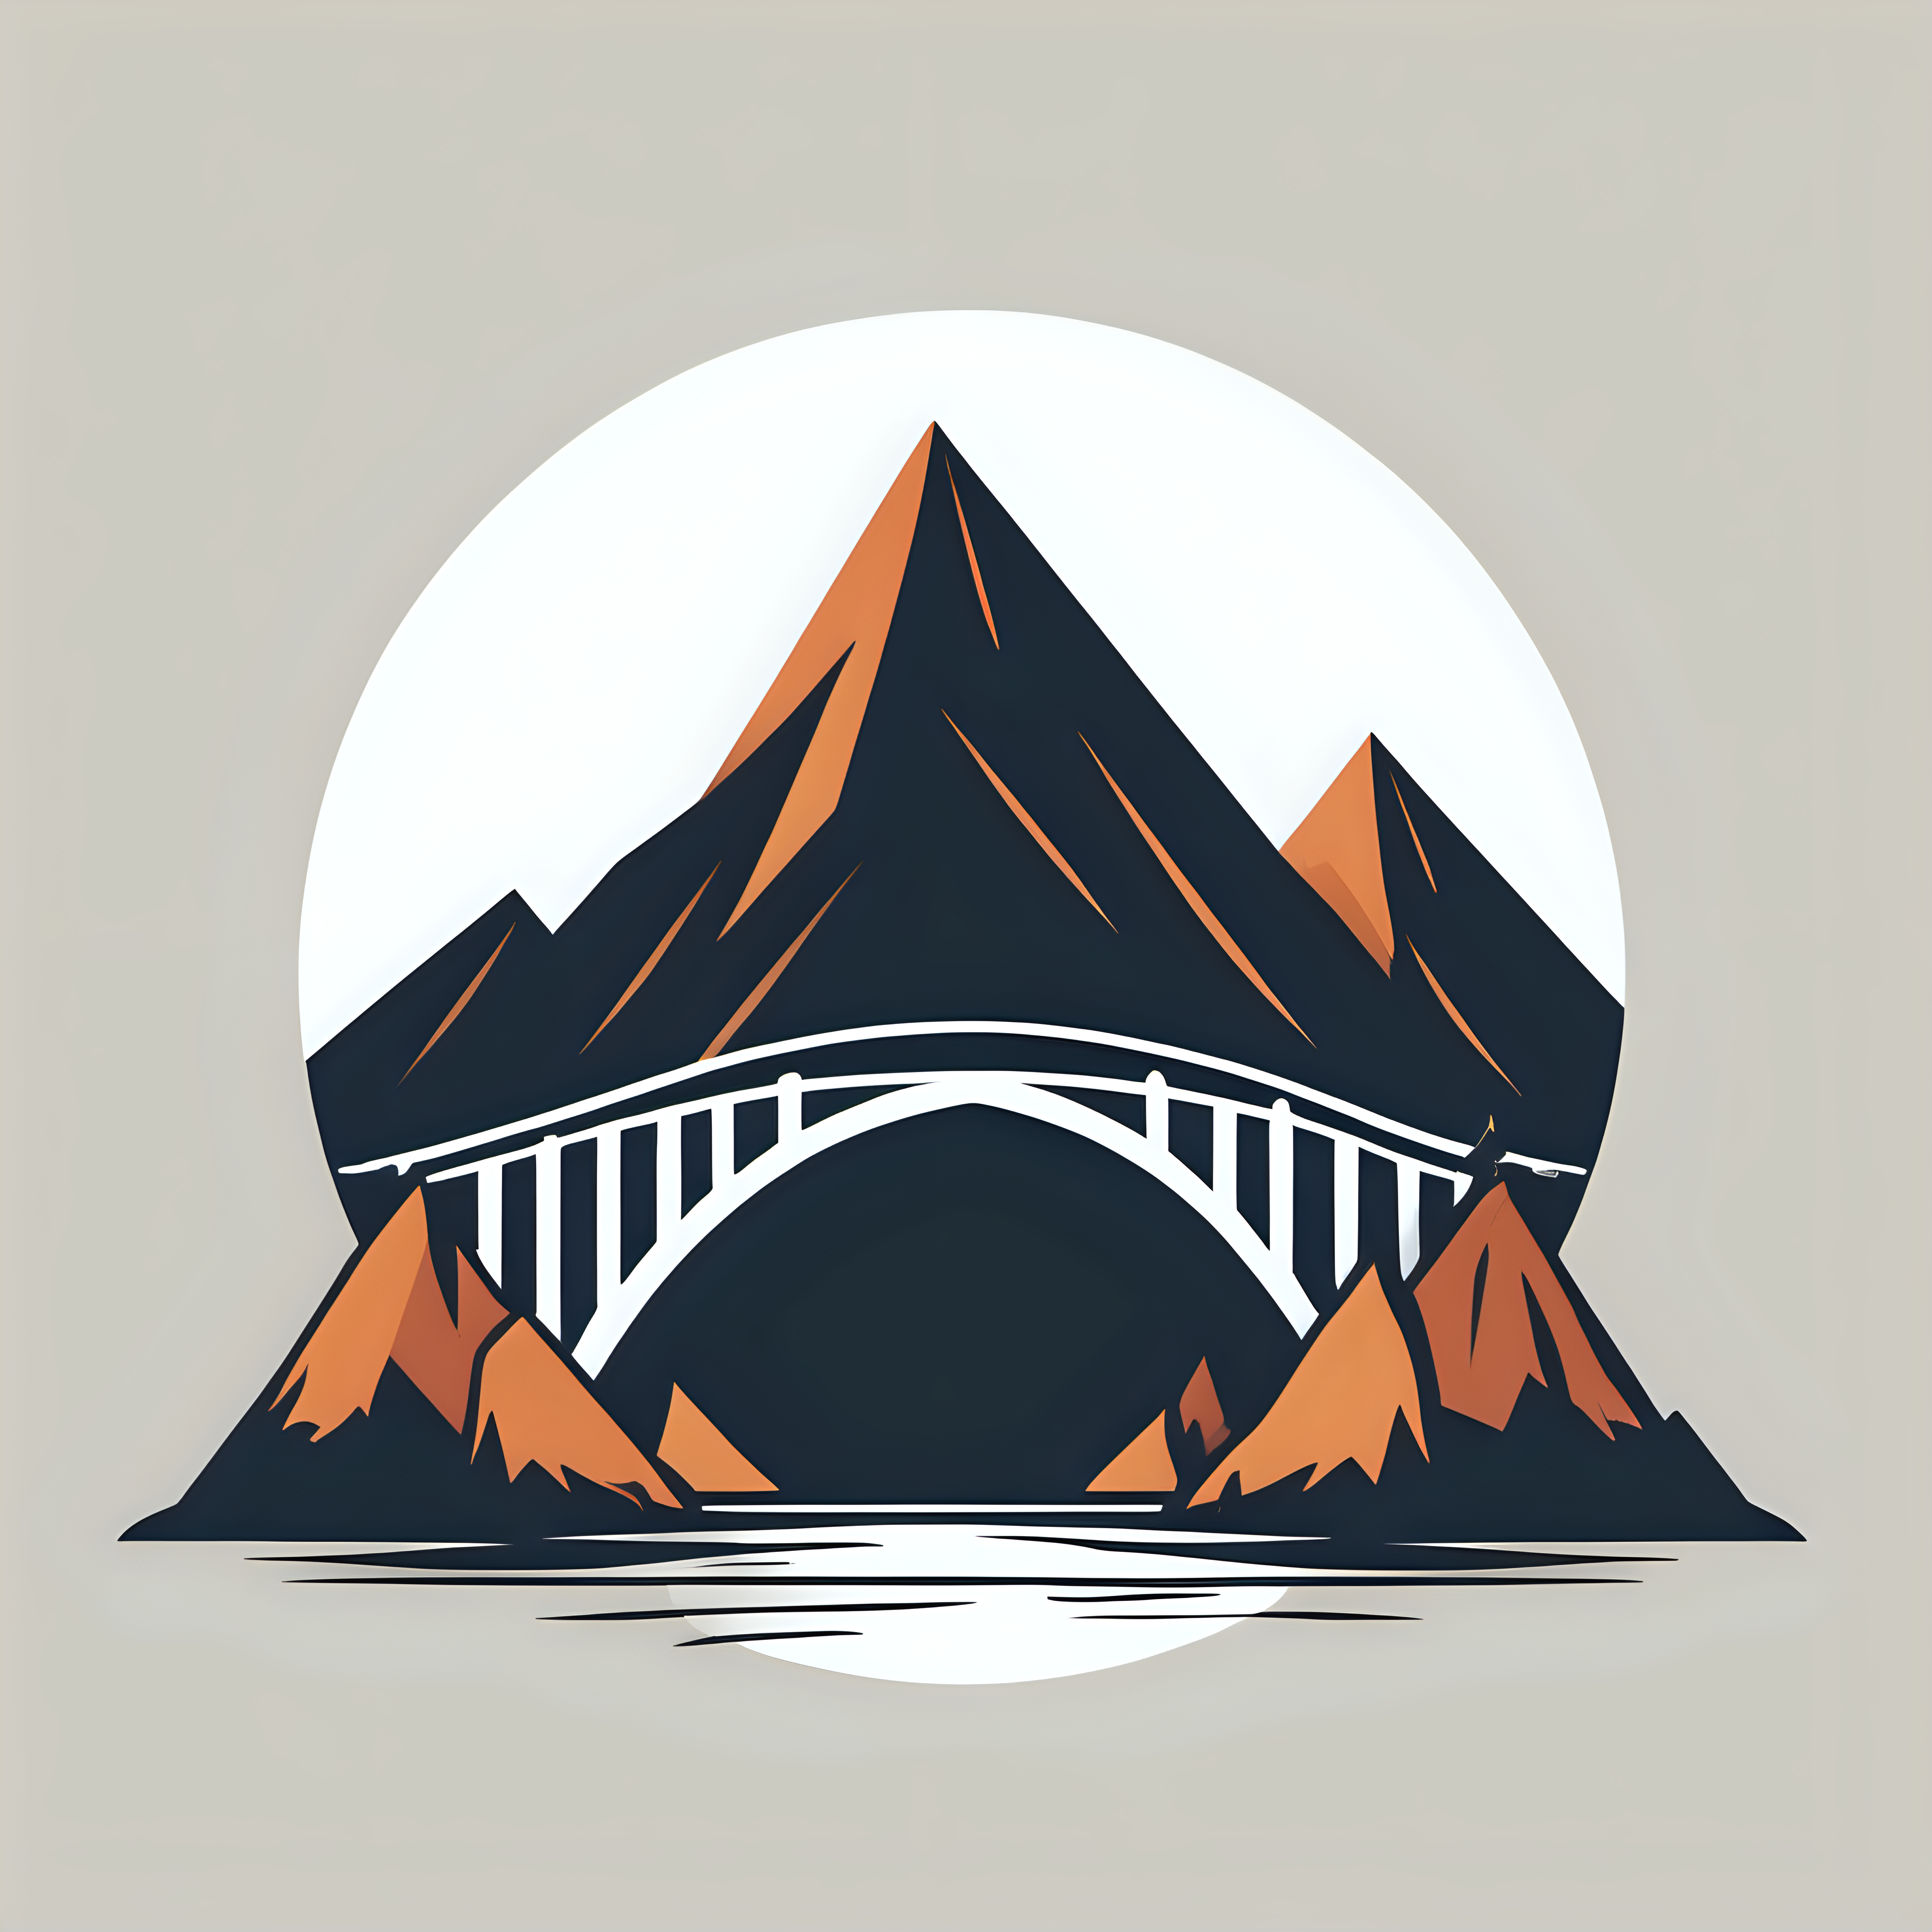 Create a simple logo, two mountains with a bridge in between, 2 layer